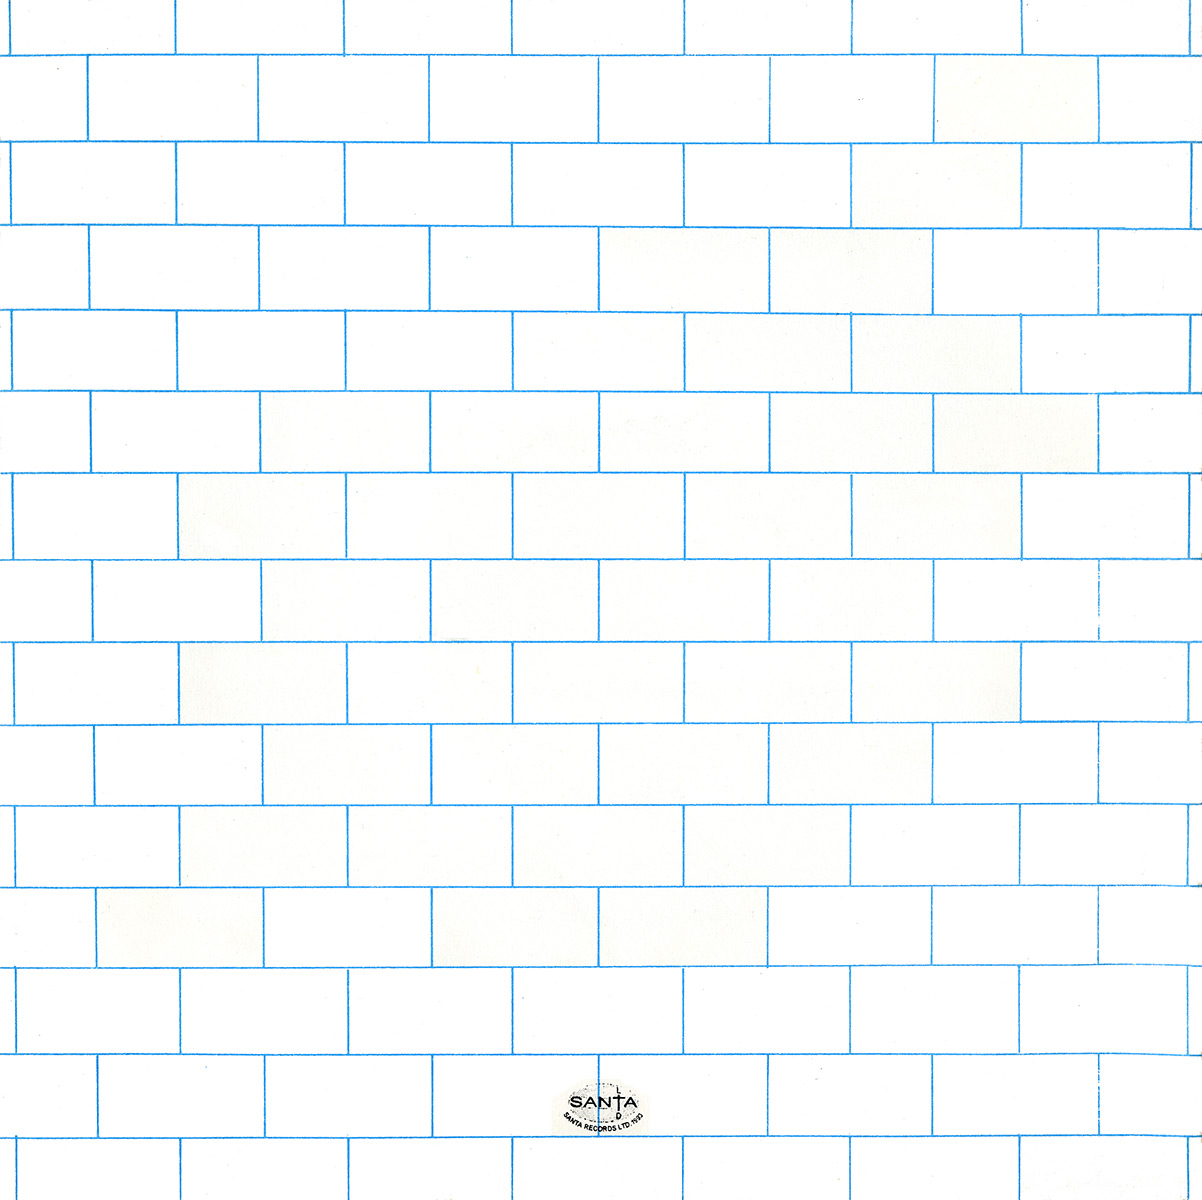 pink floyd the wall album cover art